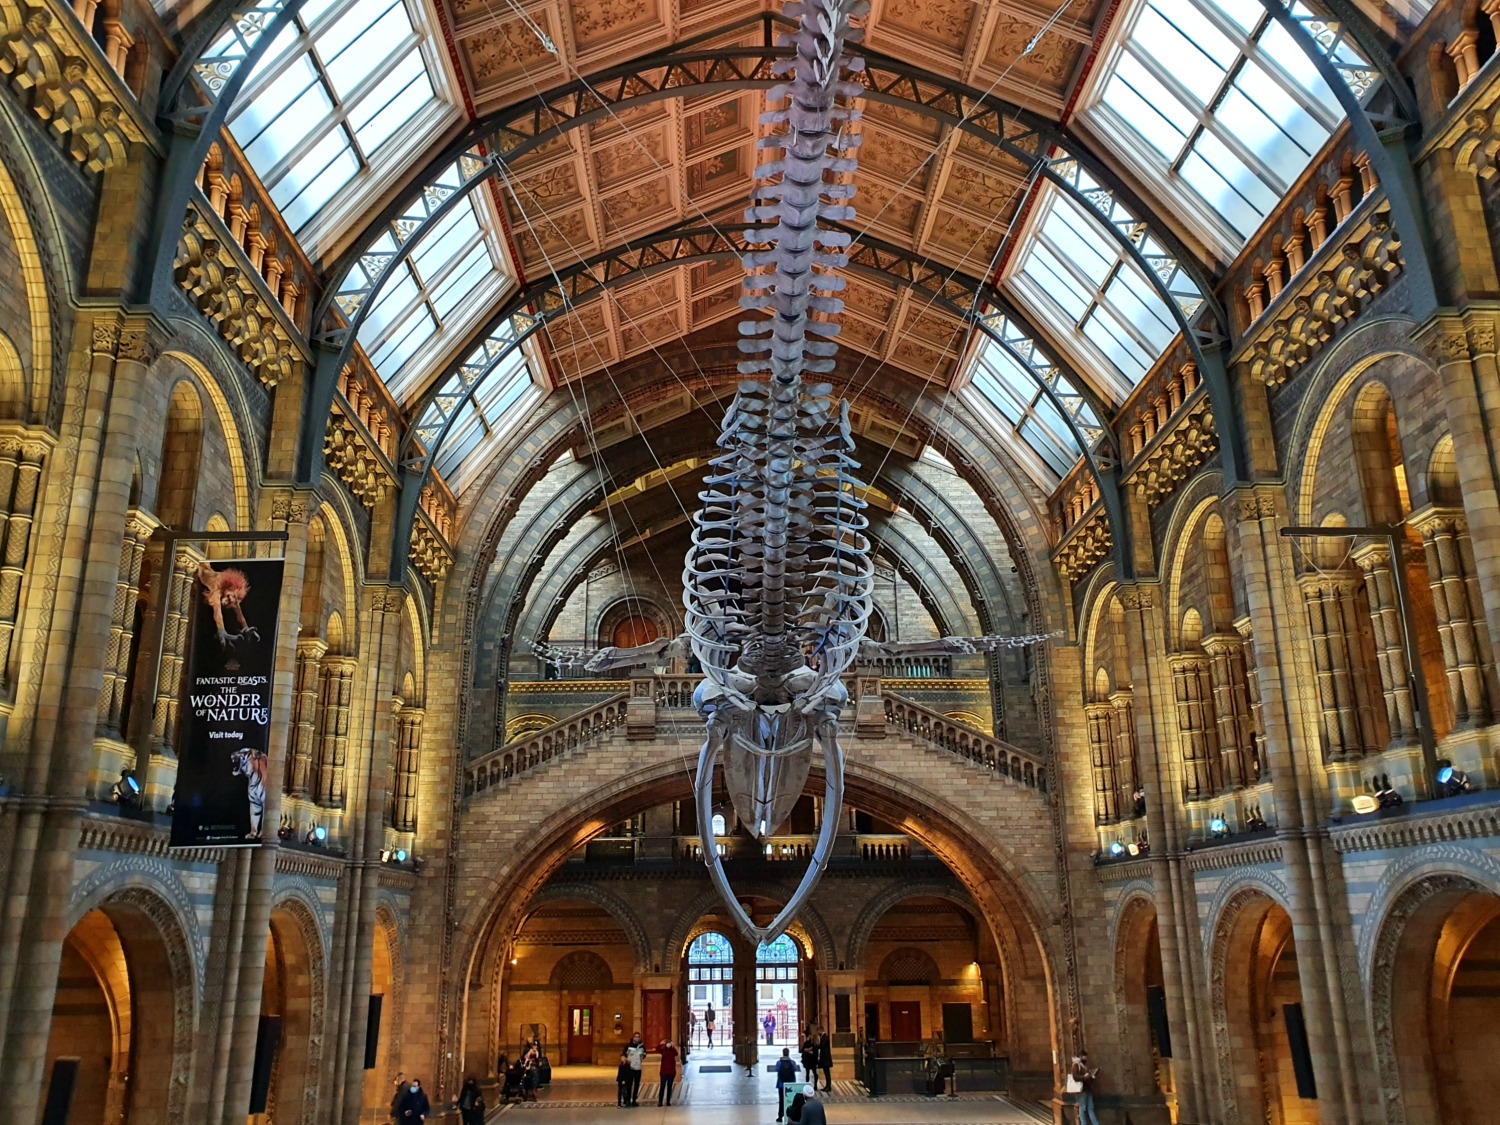 View of the whale skeleton hanging in the Hintze Hall of the Natural History Museum in London - one of our 2020 family travel days out